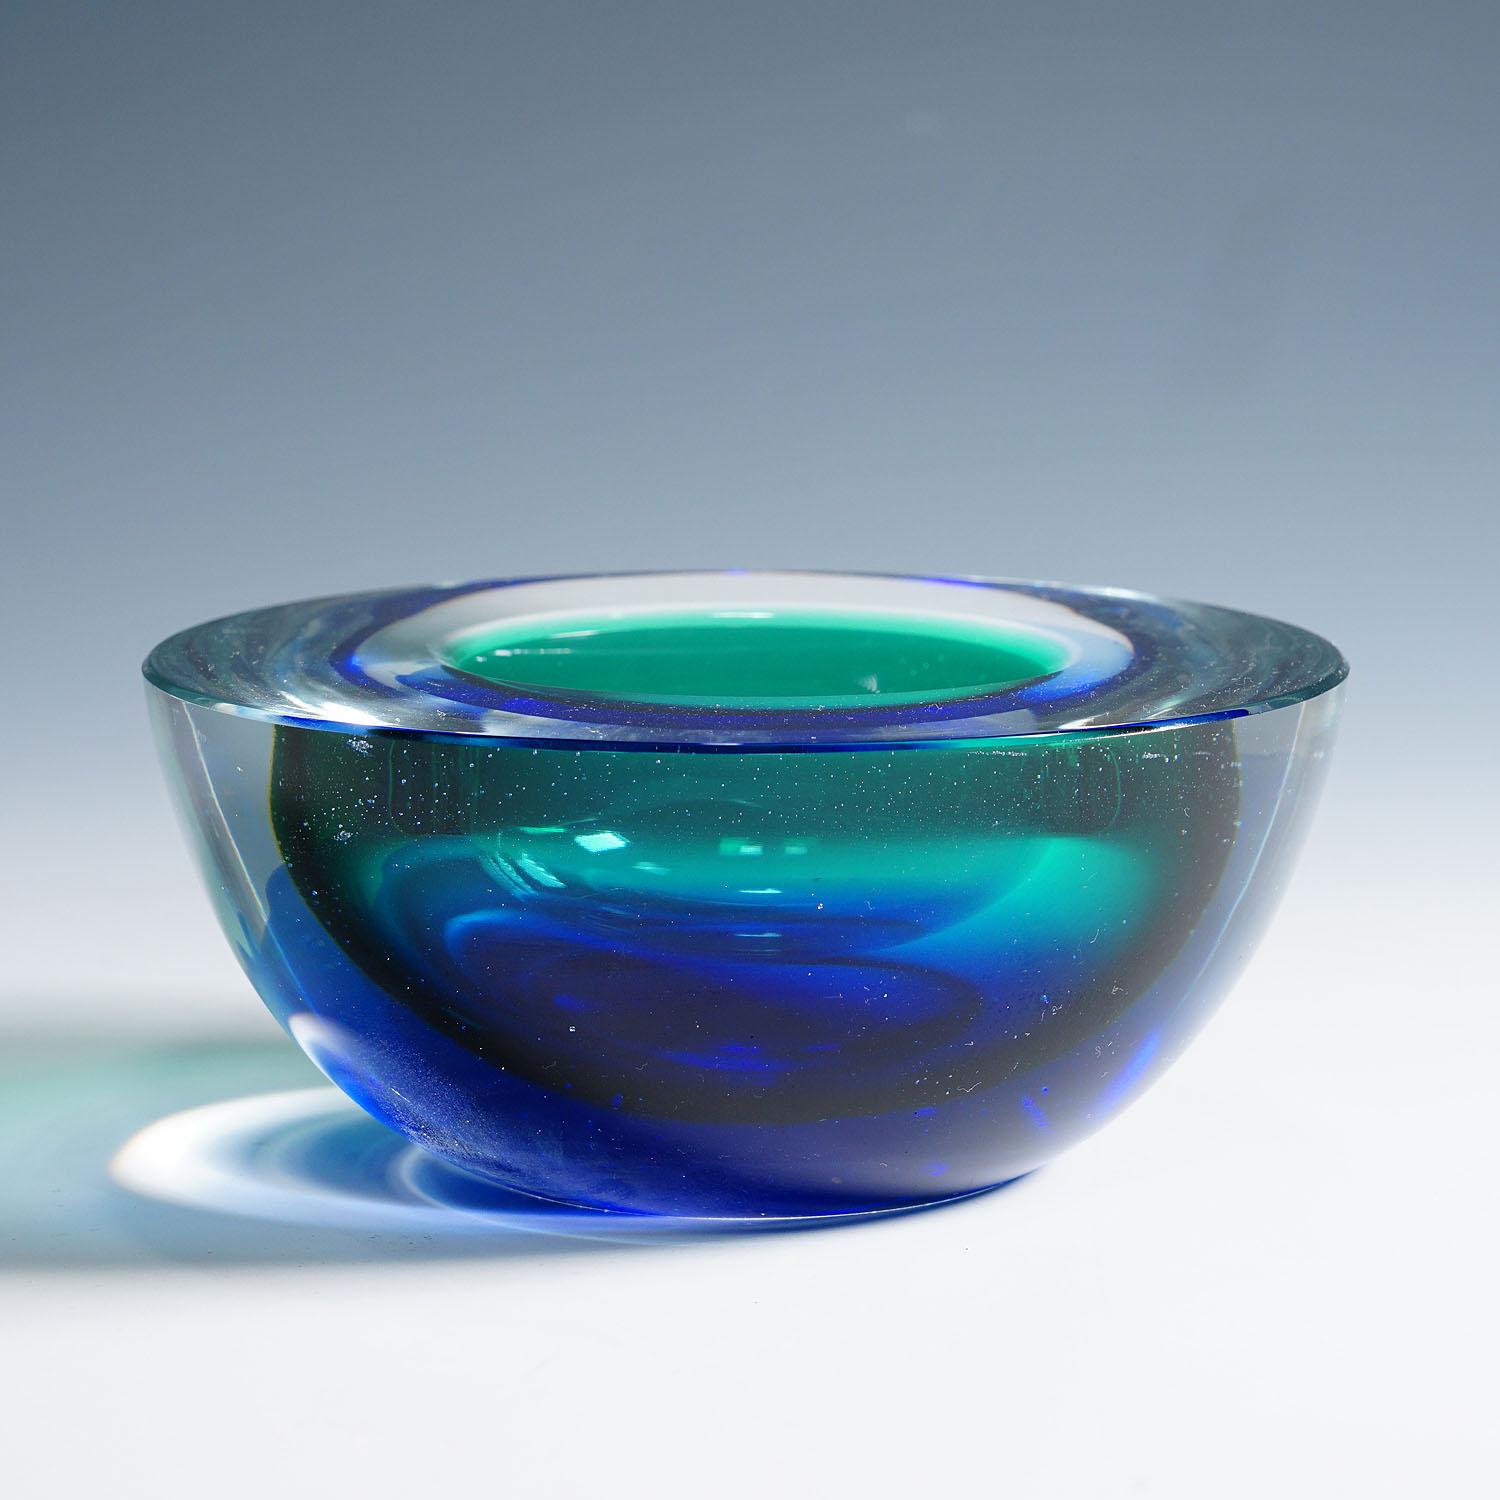 Archimede Seguso Geode Bowl in Blue and Green, Murano Italy ca. 1960s

A vintage Venetian art glass bowl in the shape of an geode designed by Archimede Seguso for Vetreria Artistica Archimede Seguso ca. 1960s. Thick sommerso glass with green, yellow